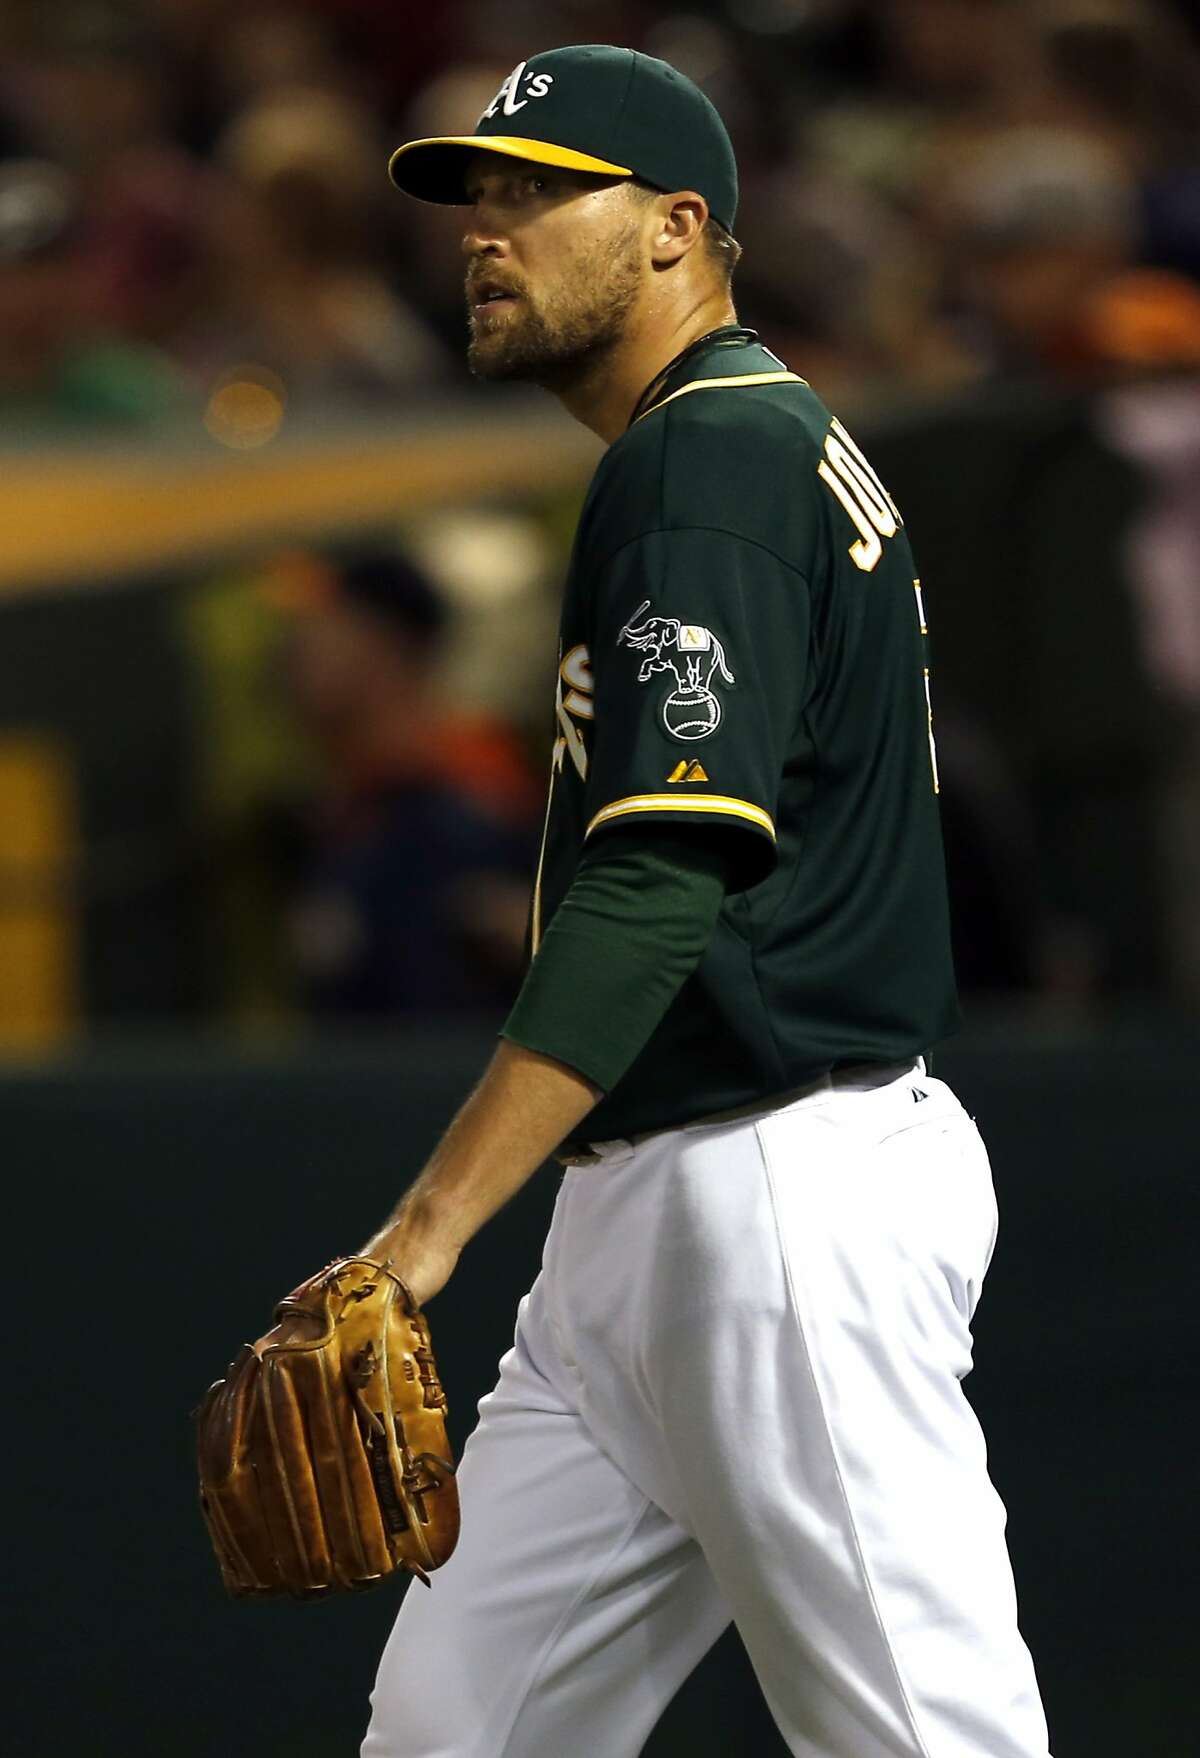 Oakland Athletics' Jim Johnson while giving up 4 runs without recording an out in 8th inning during A's 9-7 win over Houston Astros during MLB game at O.co Coliseum in Oakland, Calif. on Wednesday, July 23, 2014.